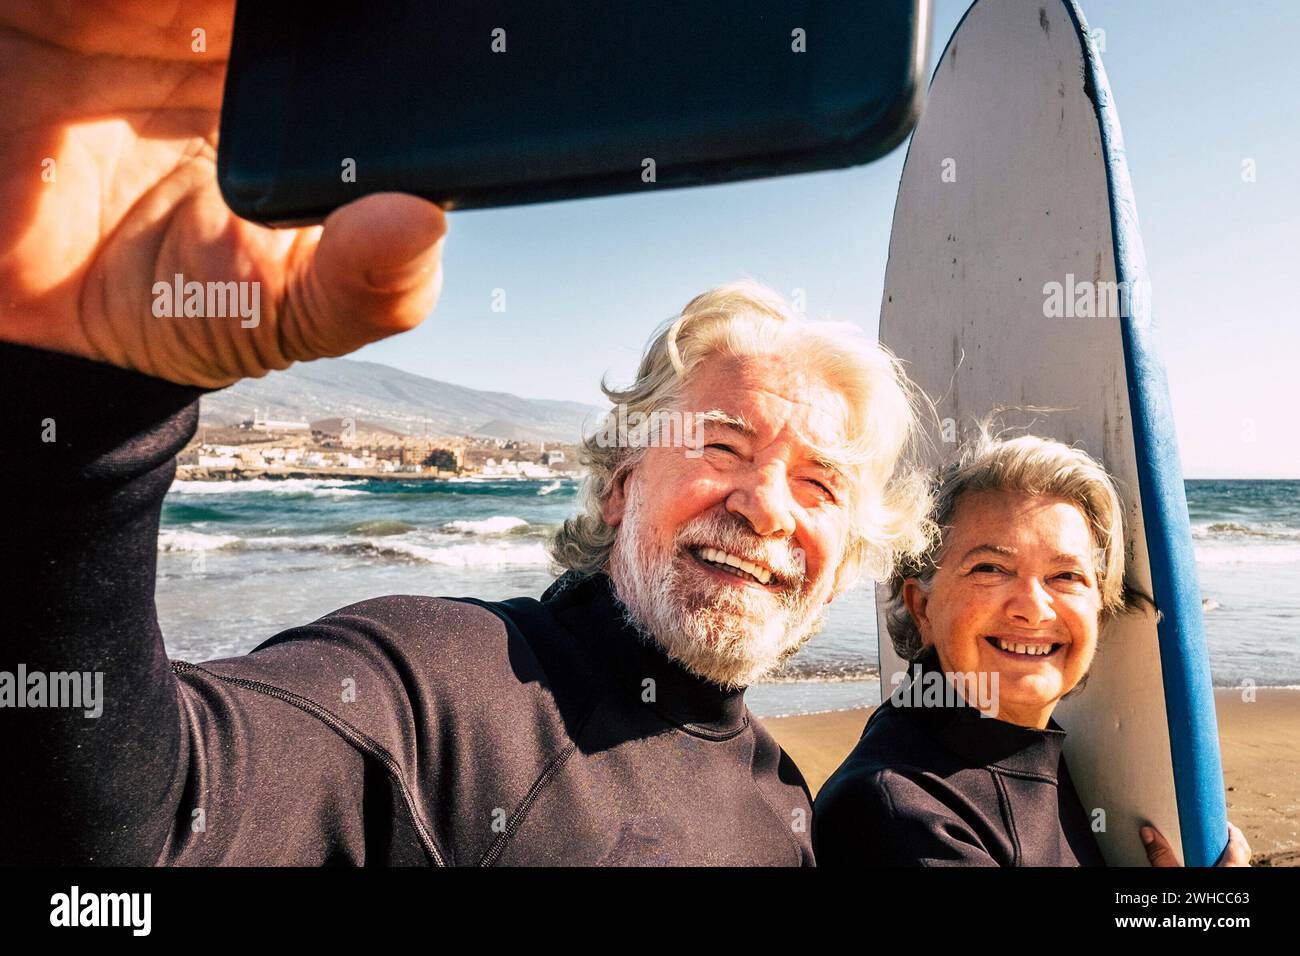 couple of pensioners seniors taking a selfie together at the beach with their wetsuits and surfboards - mature people learning surfing Stock Photo